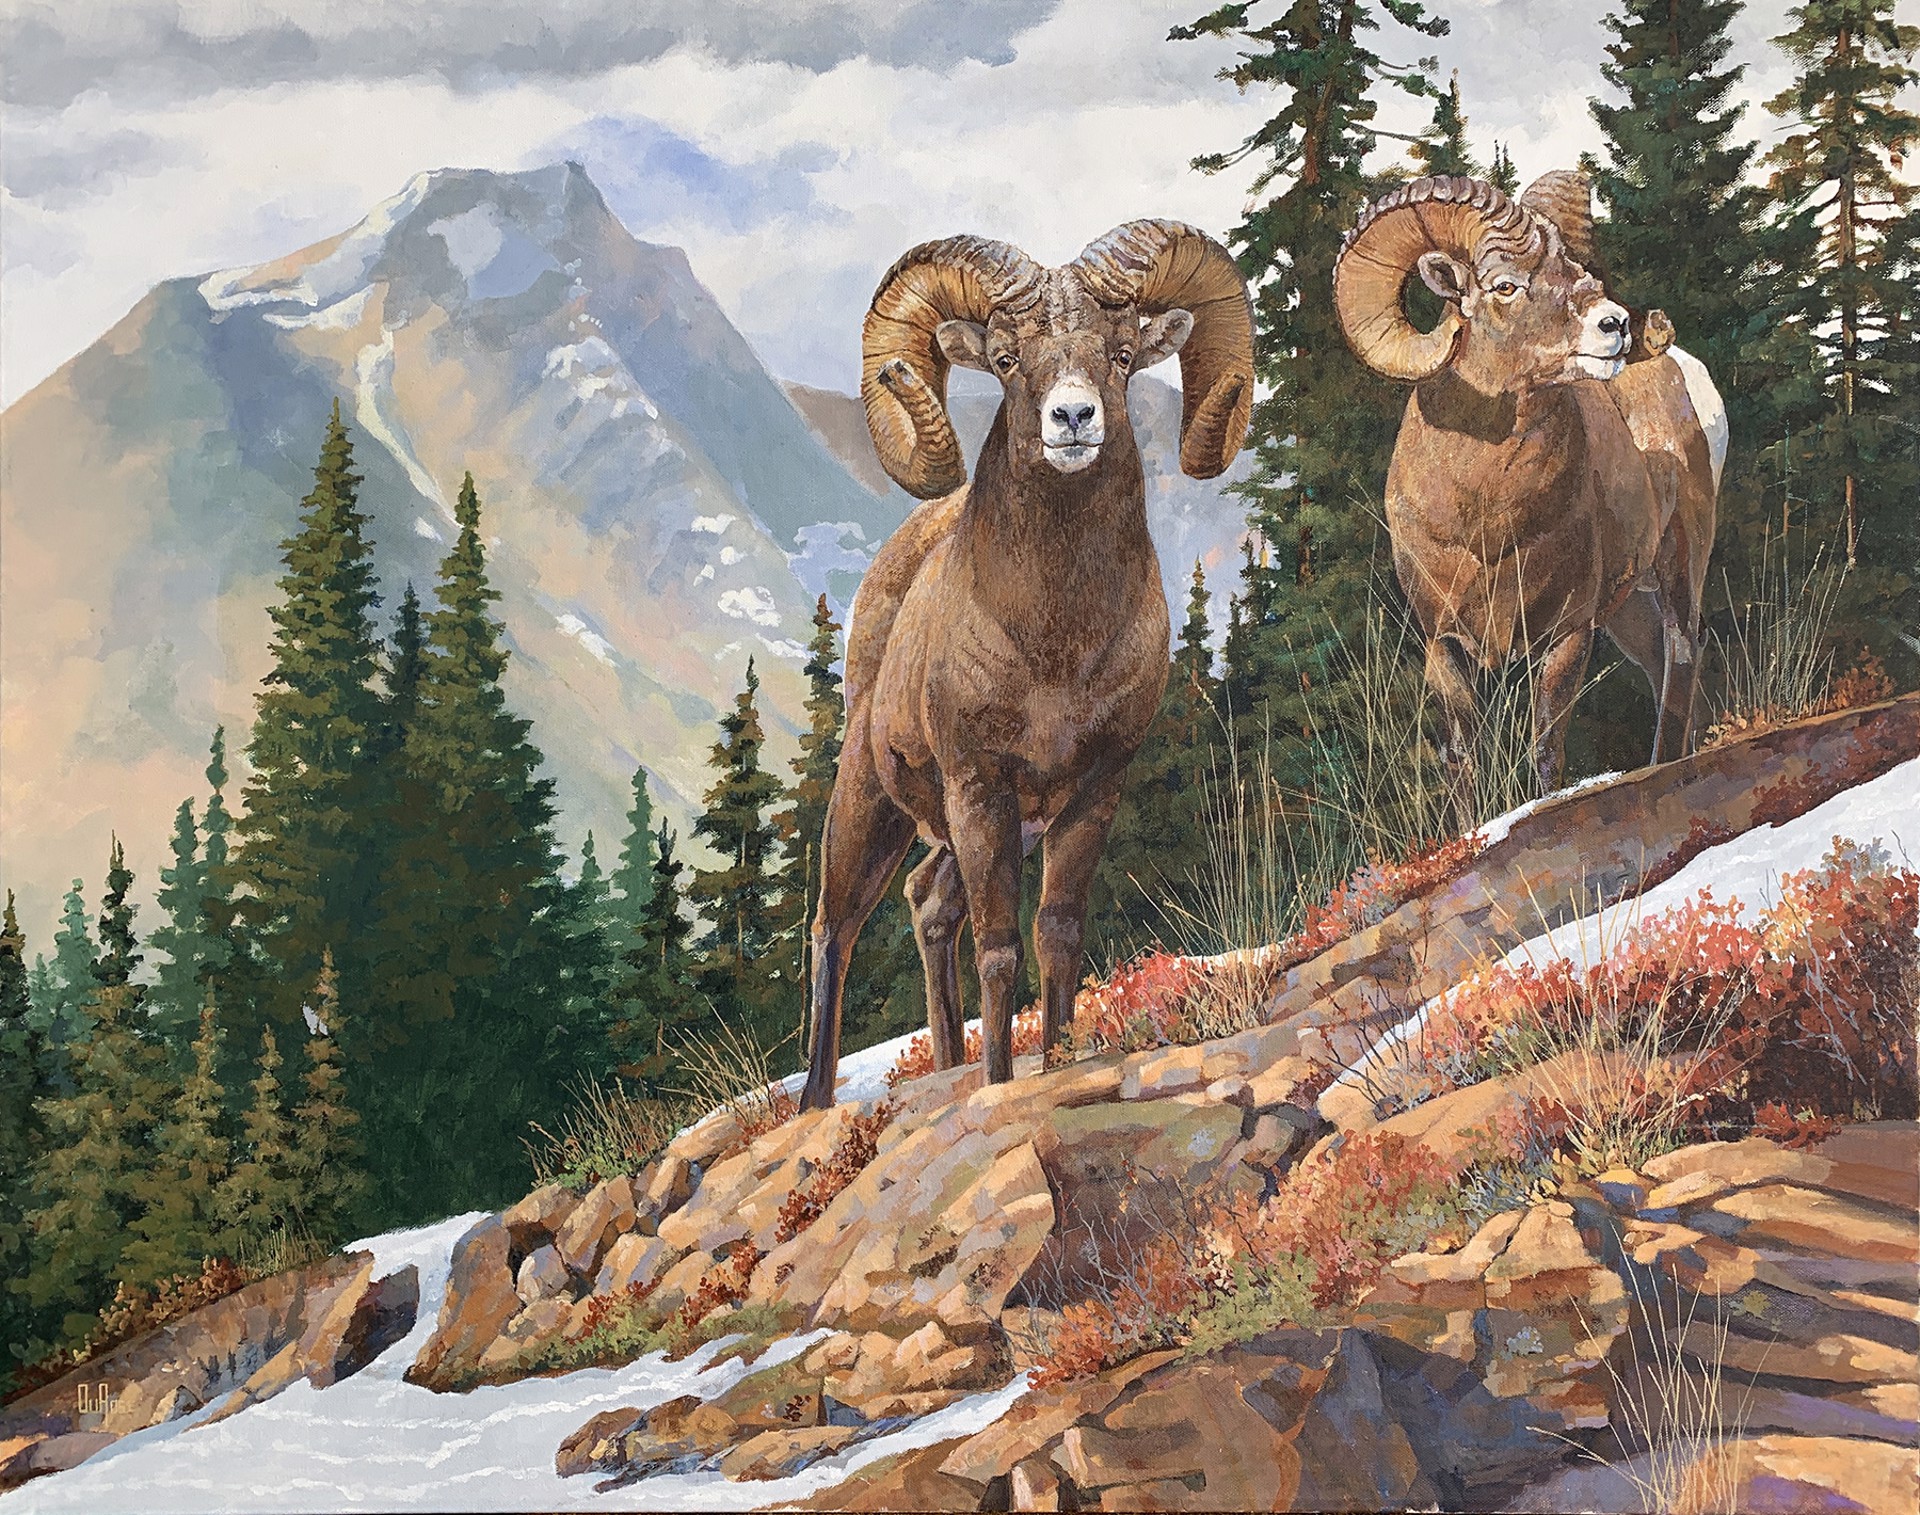 They Came Out of the Bighorns by Ed DuRose